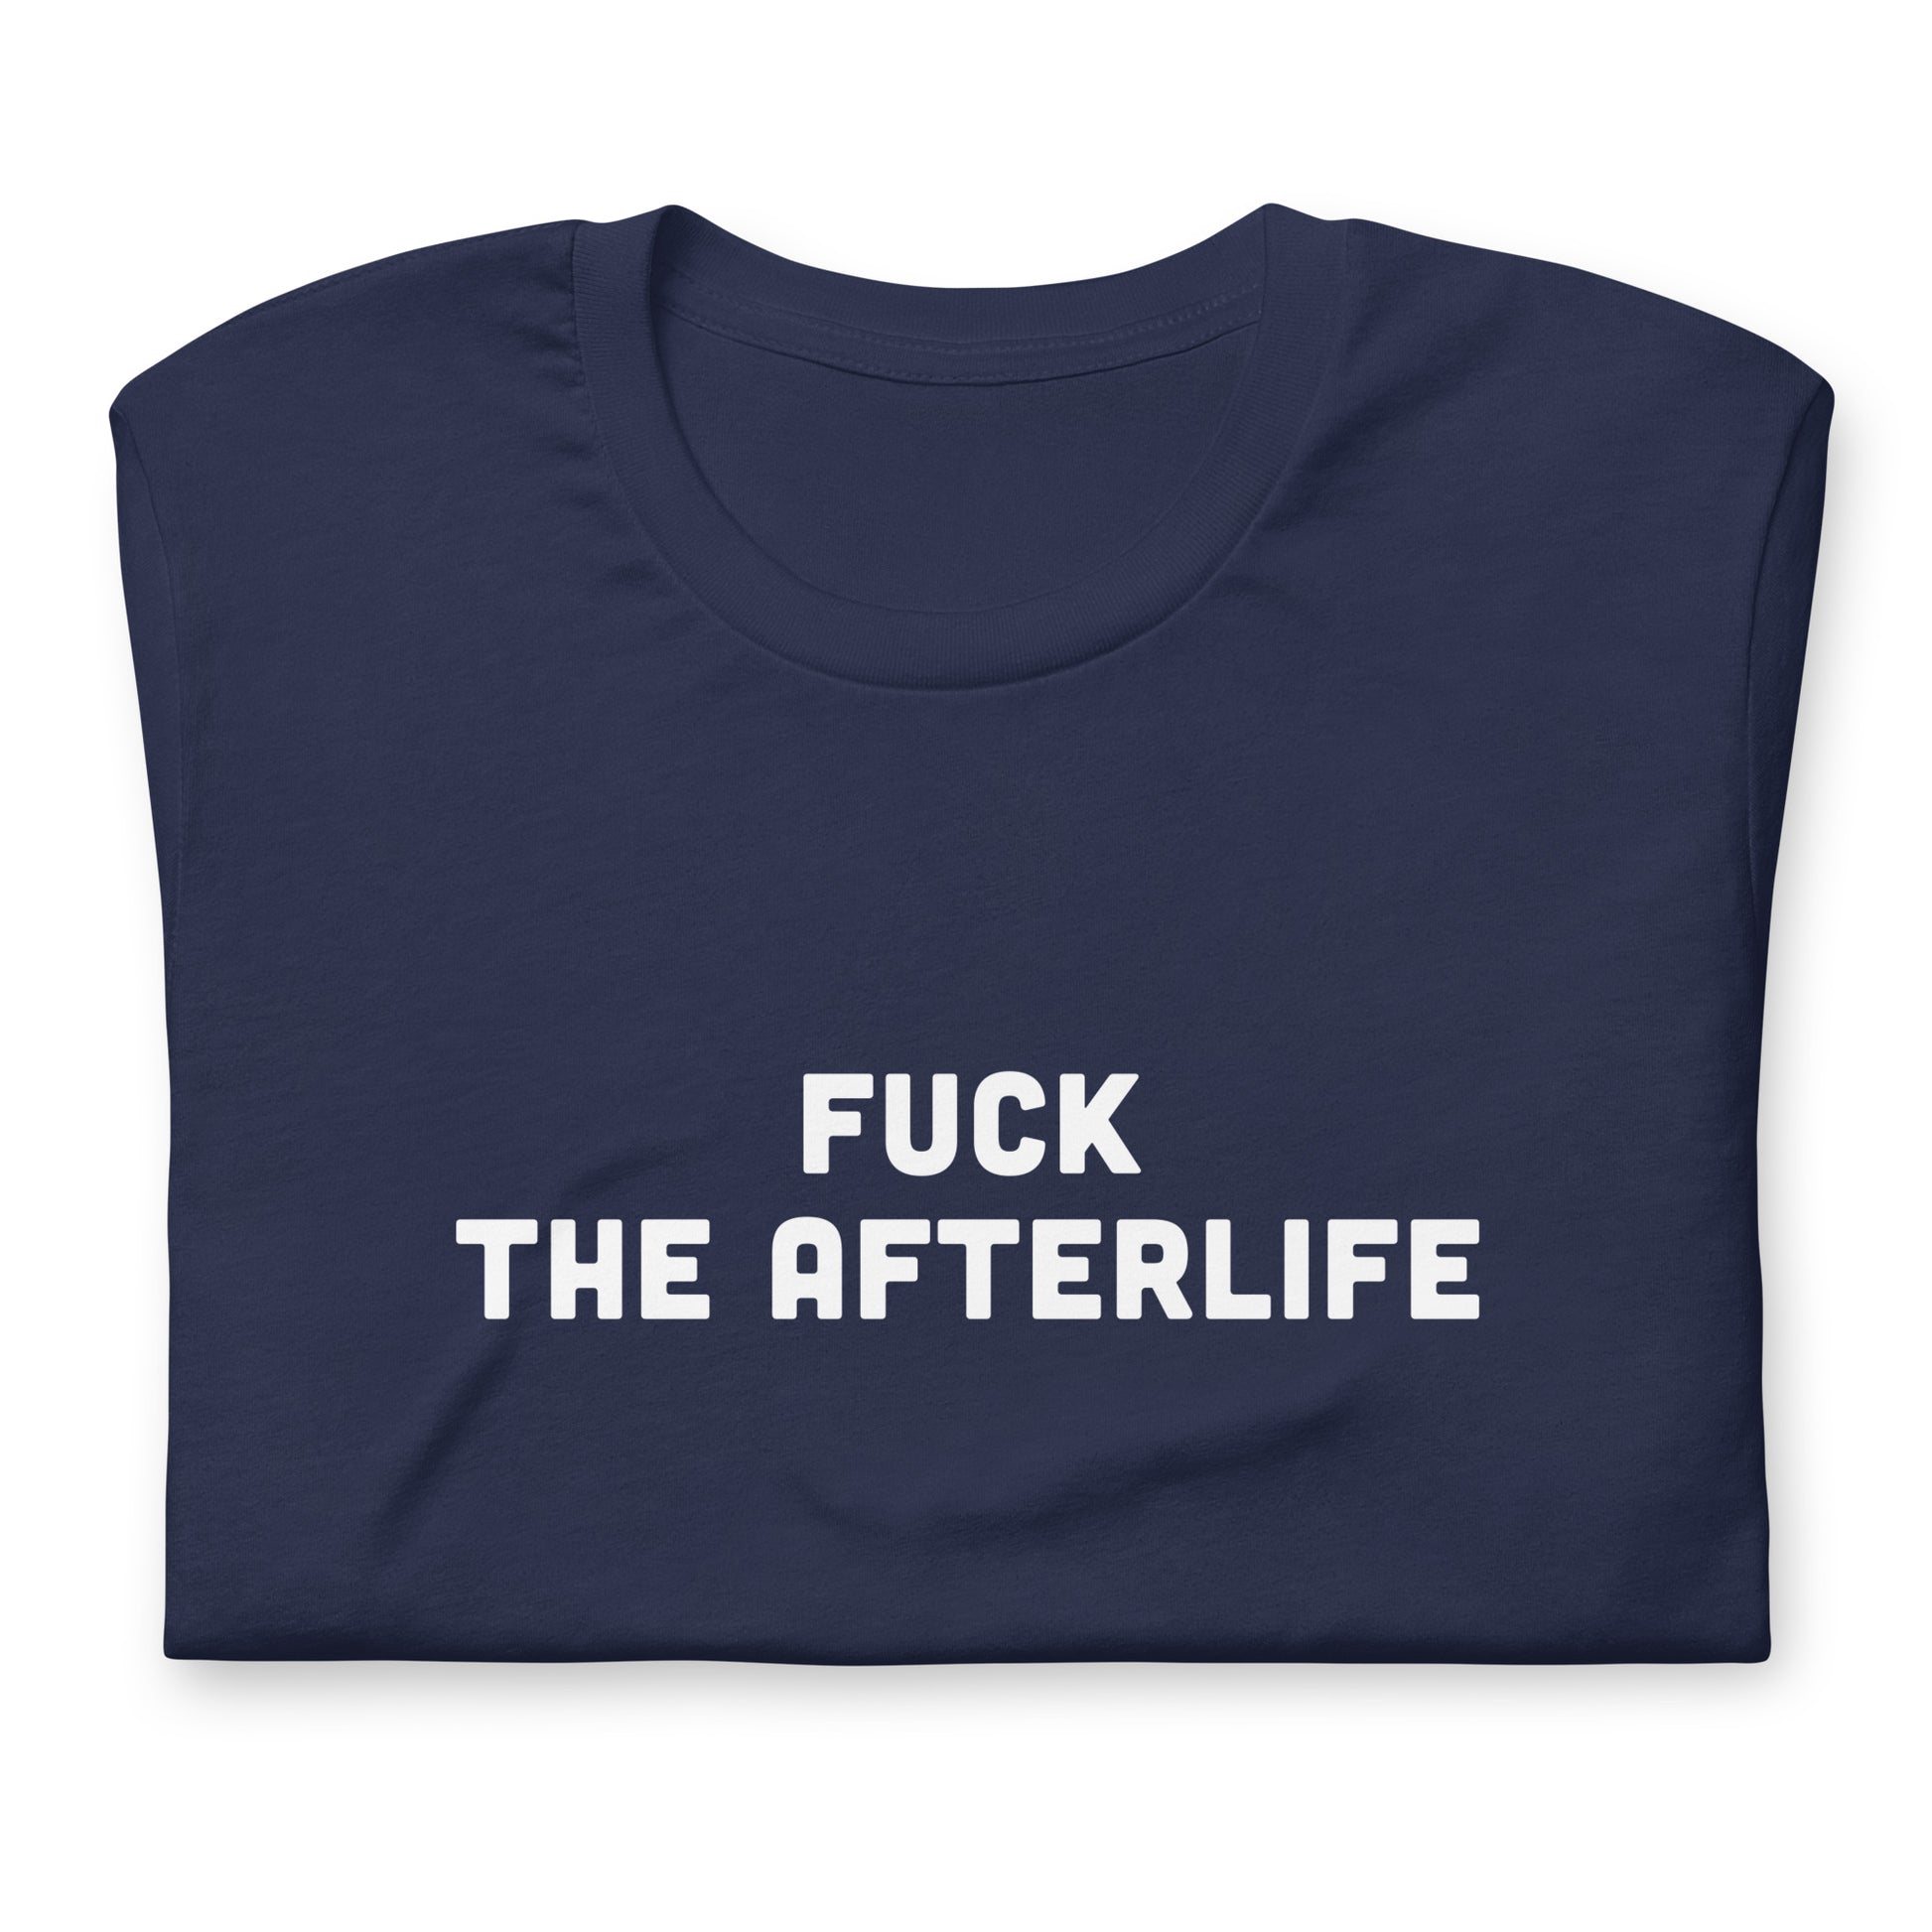 Fuck The Afterlife T-Shirt Size M Color Black